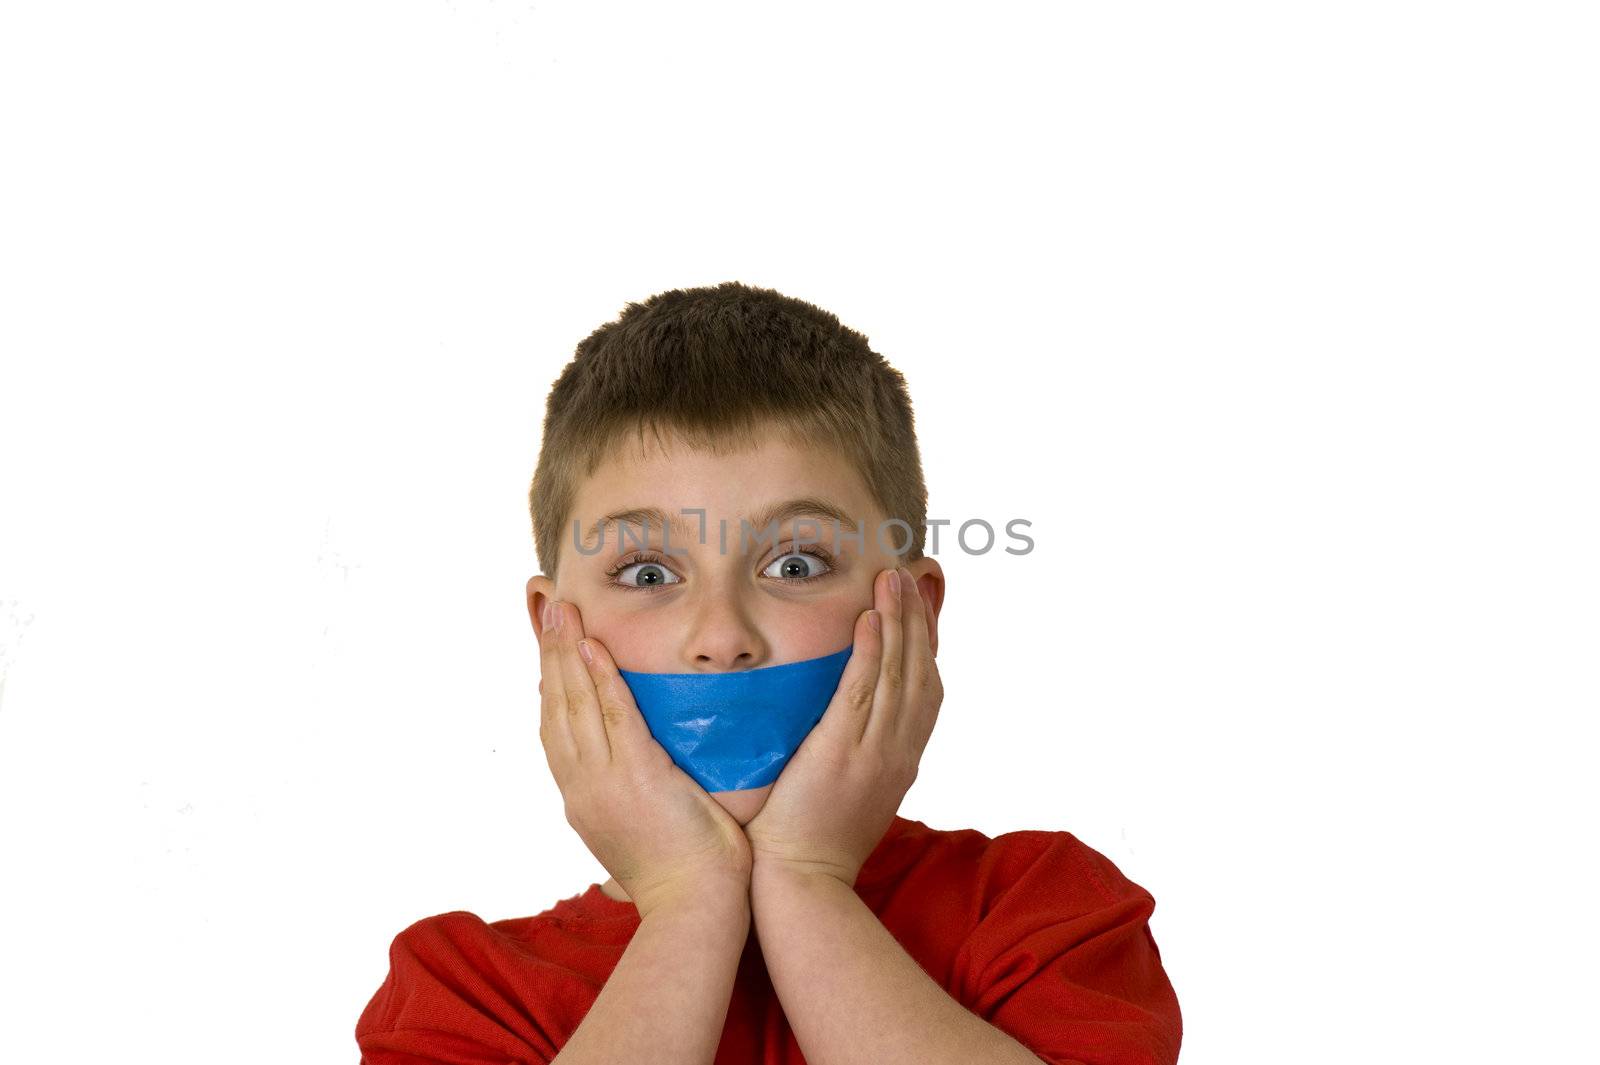 Boy gagged showing how he was silenced